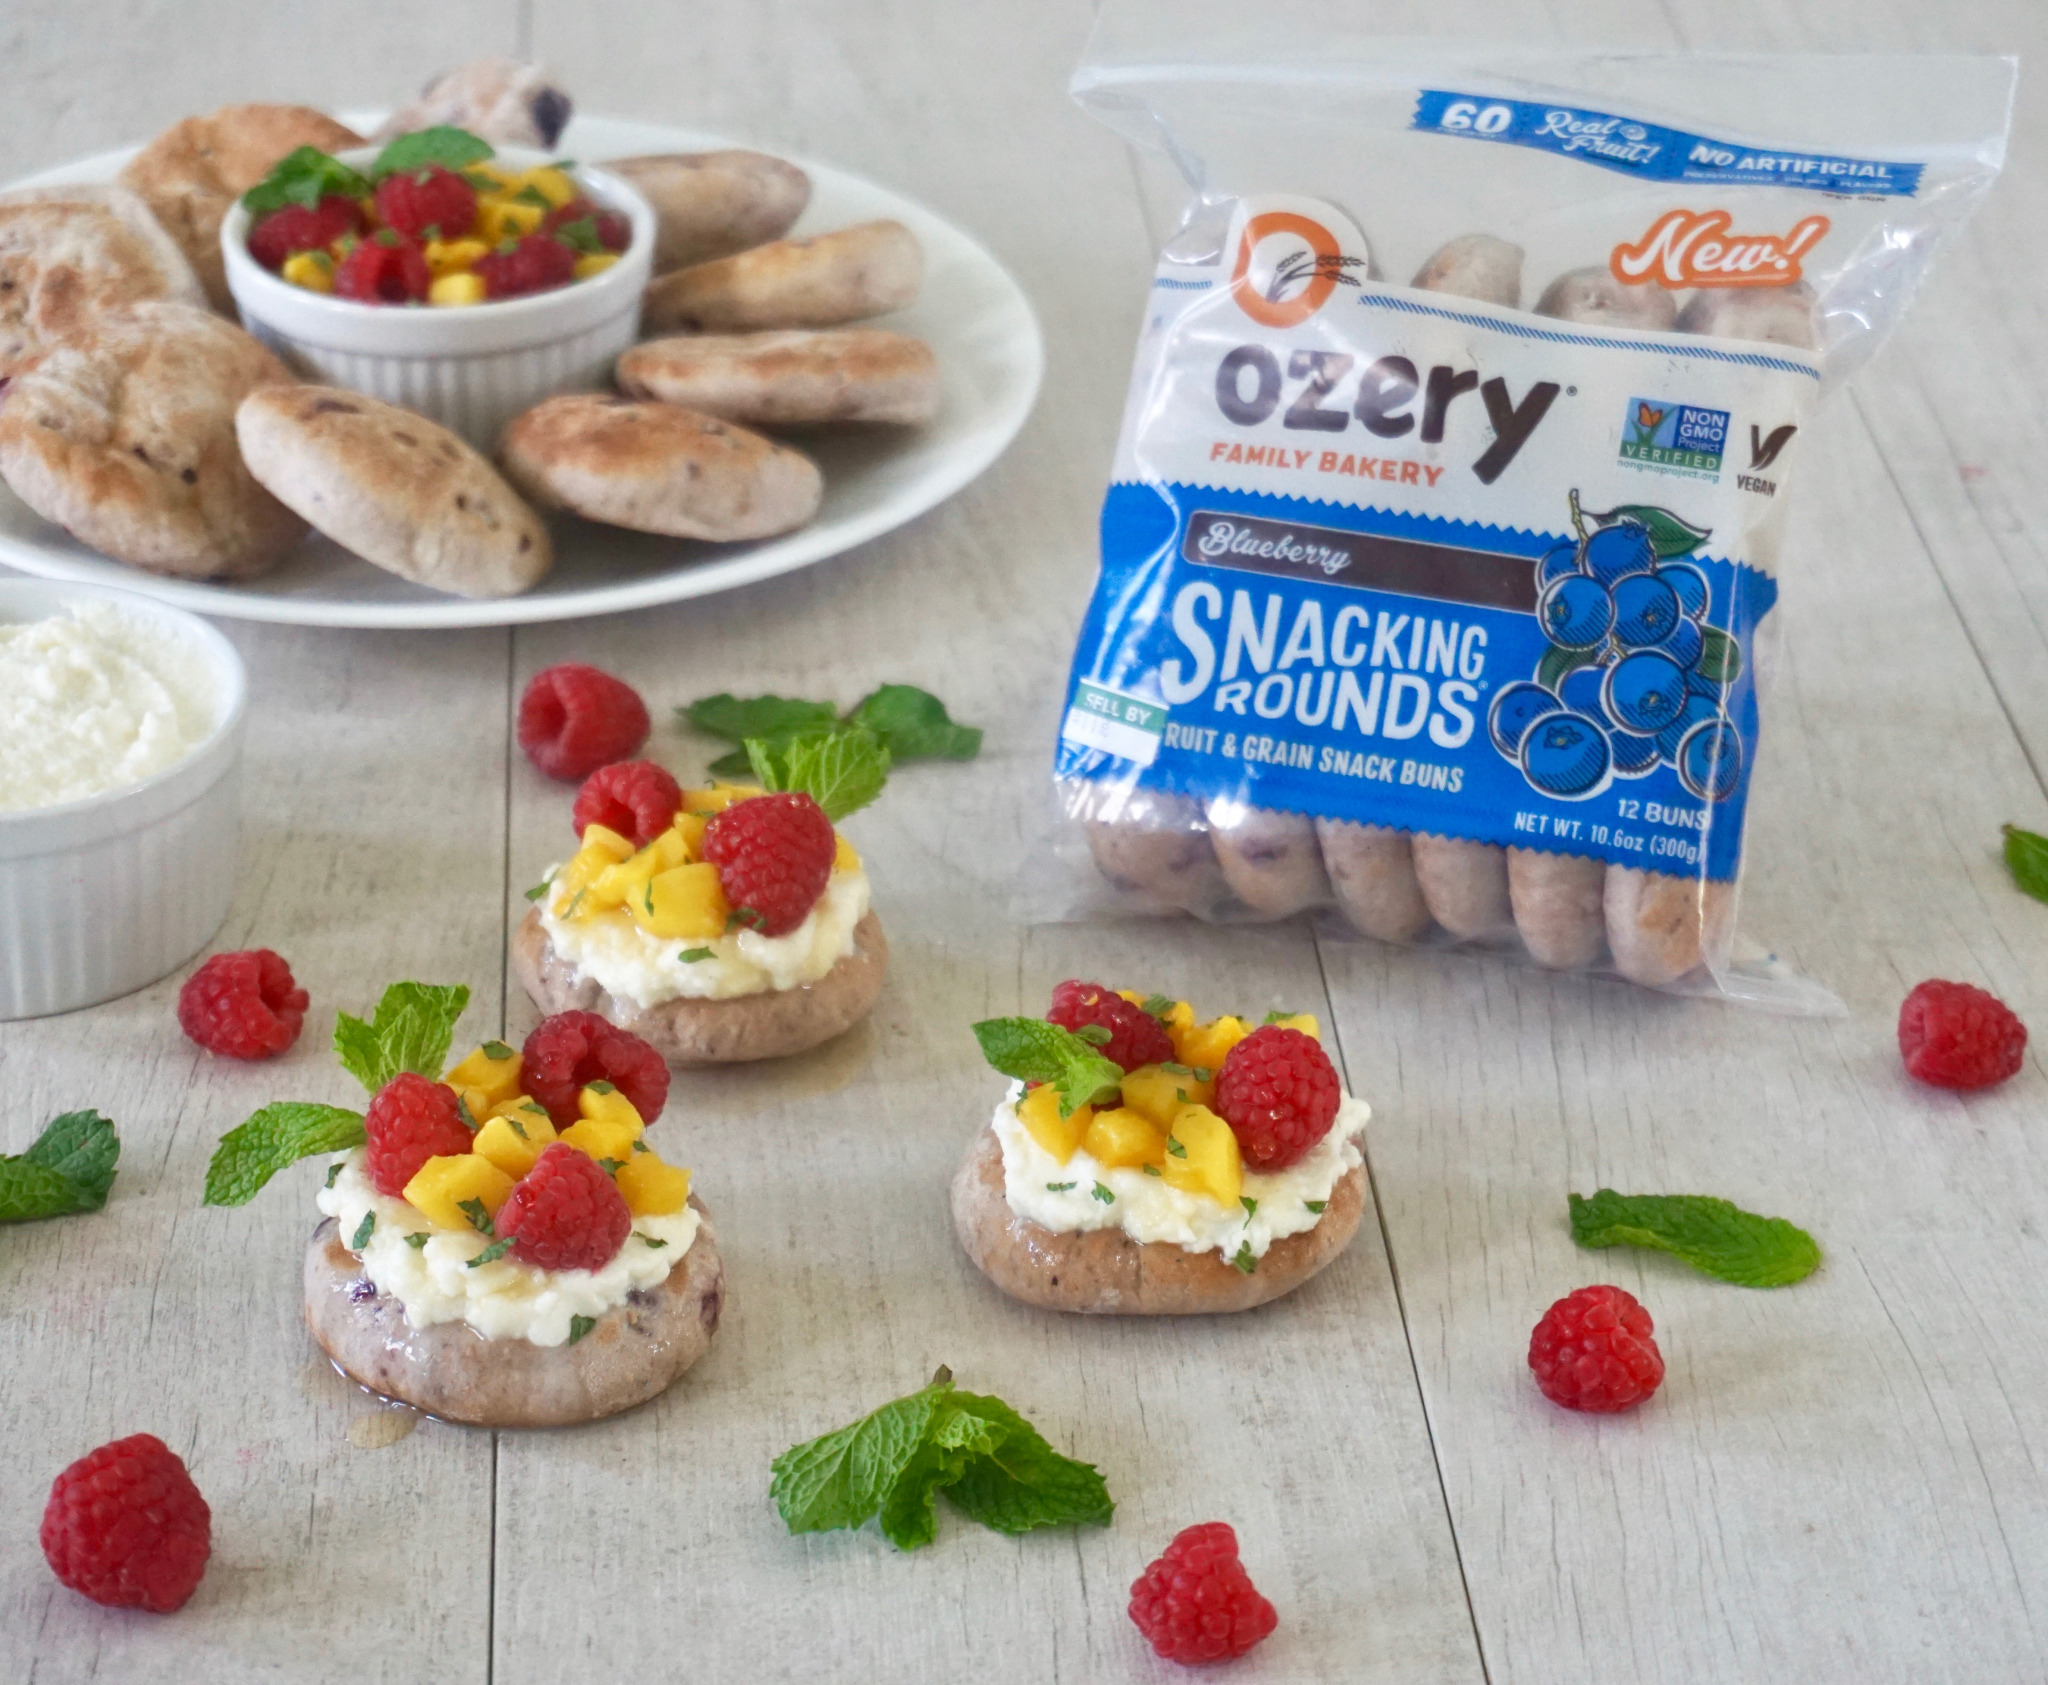 Ozery snacking rounds blueberry topped with fruit